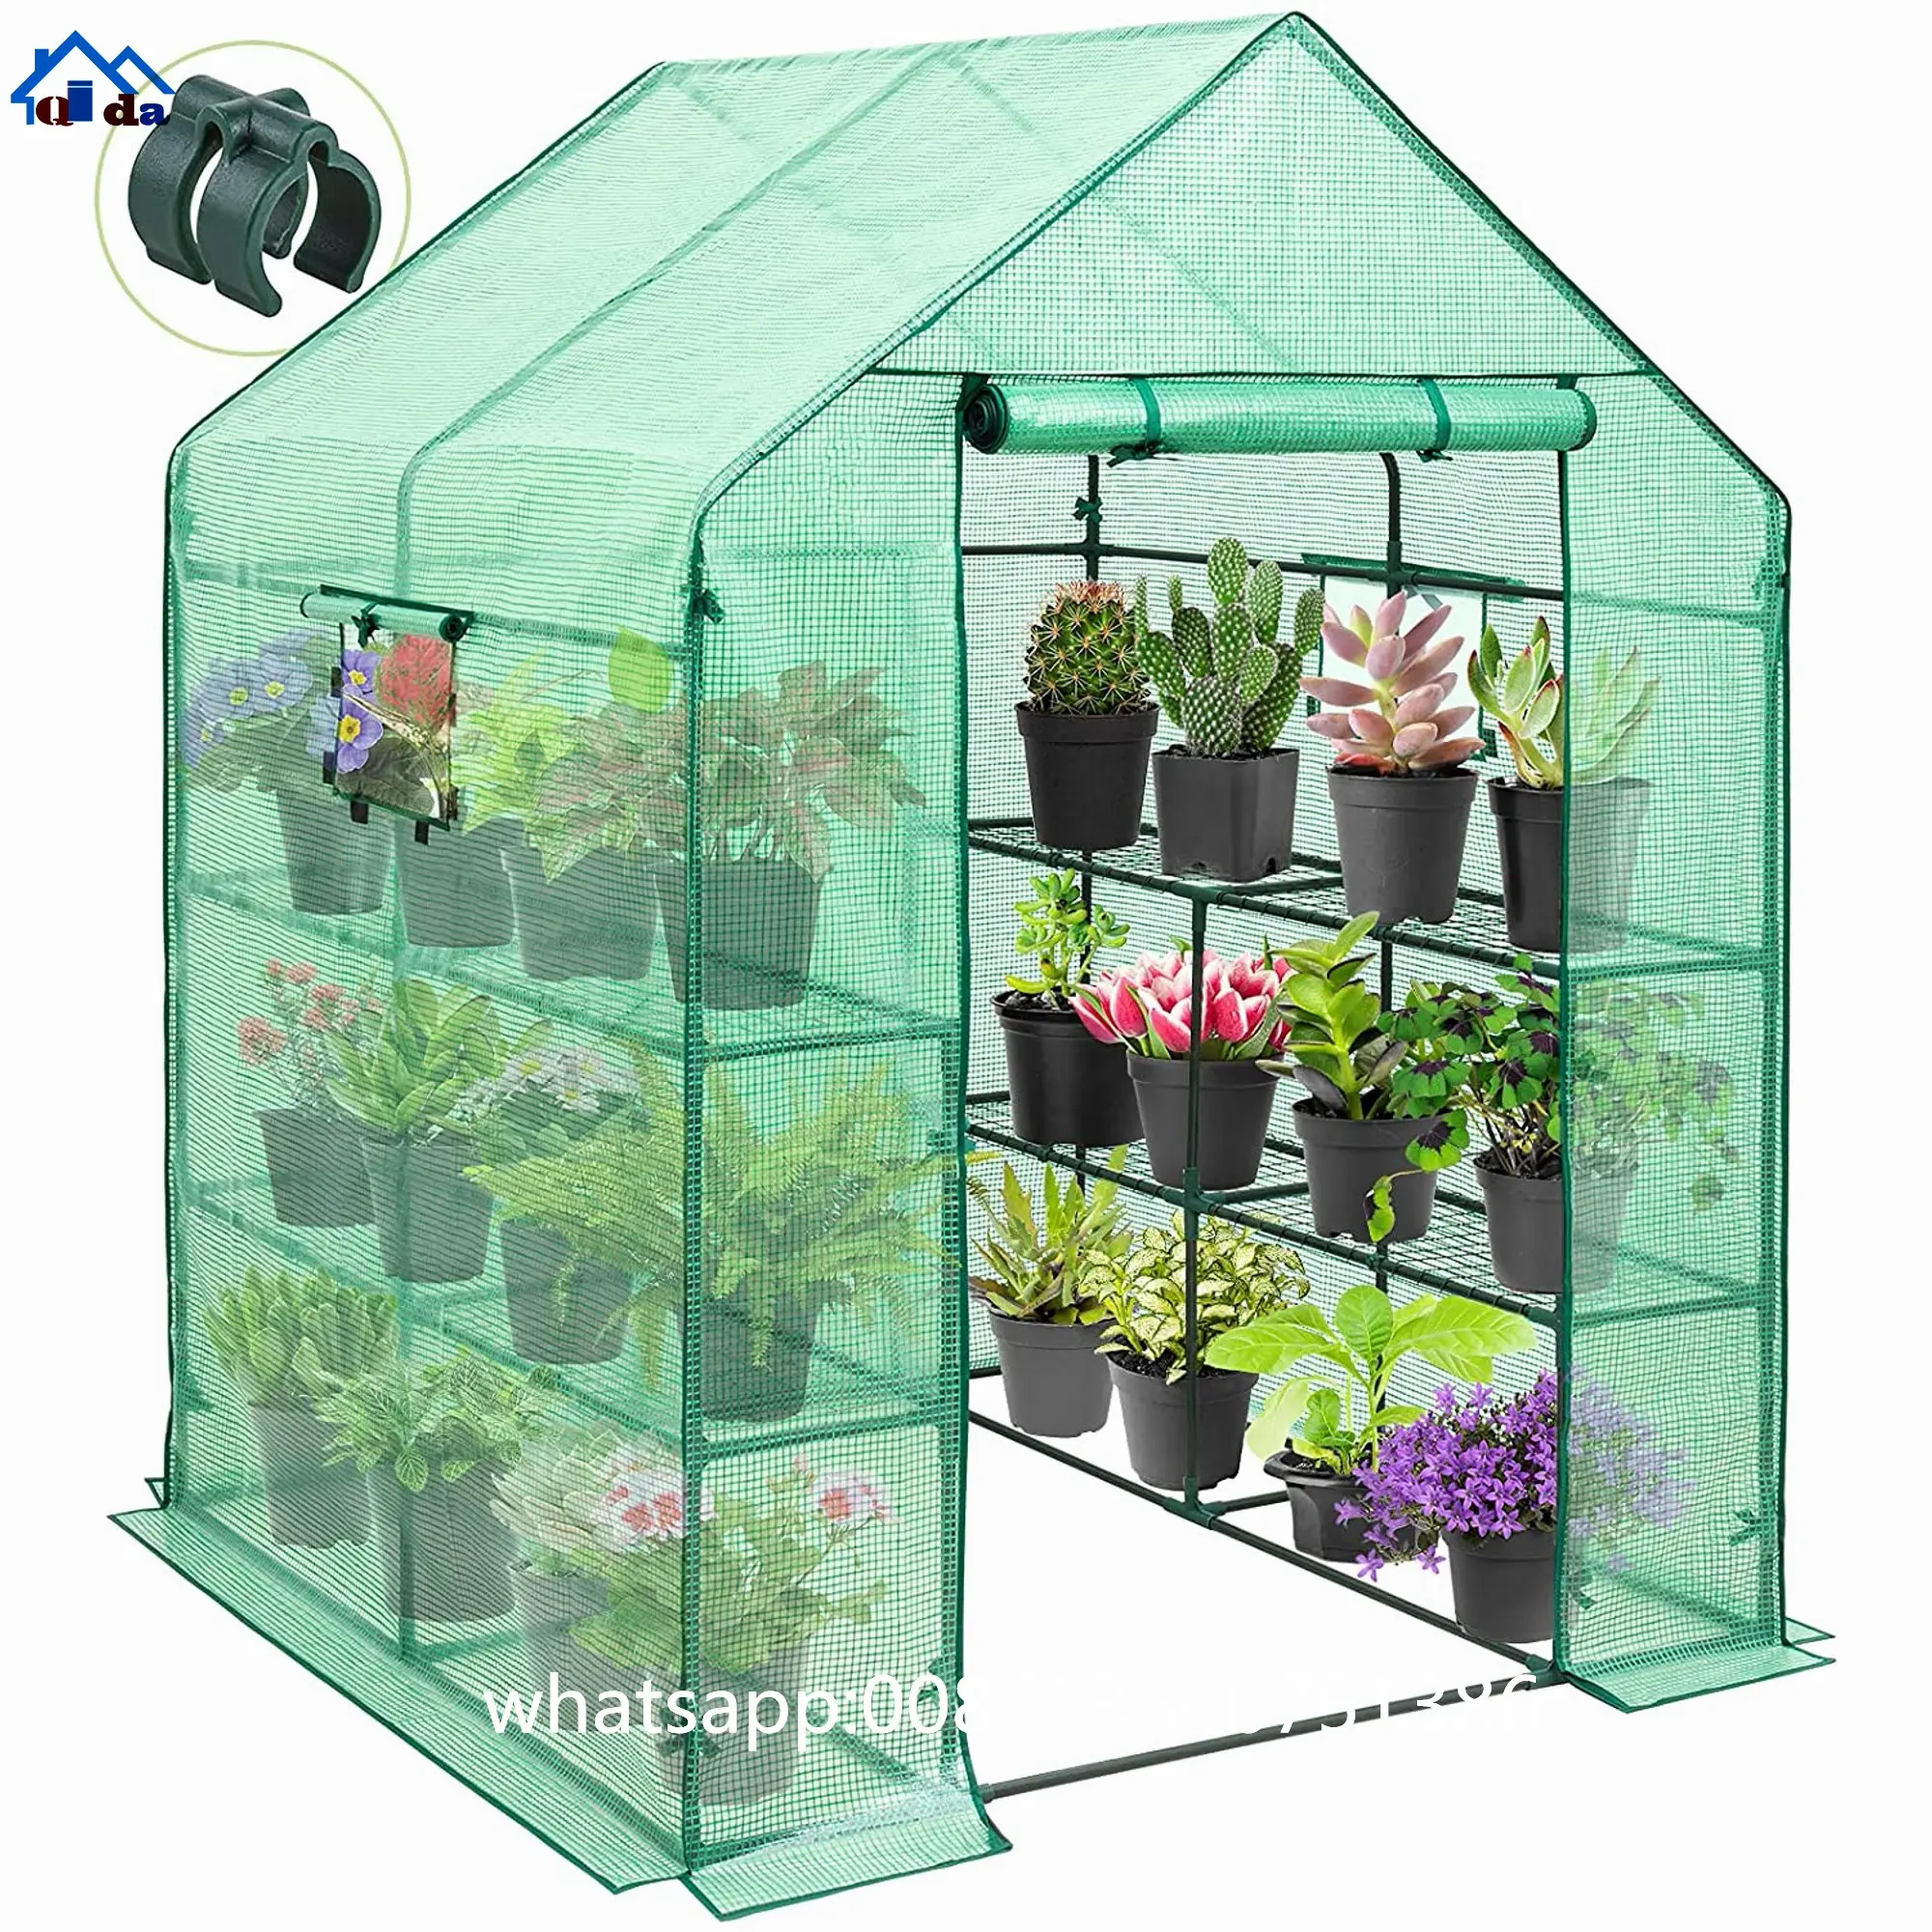 Outdoor Rainproof Pvc Transparent Cover Garden Greenhouse Plant Growing Greenhouse For Winter